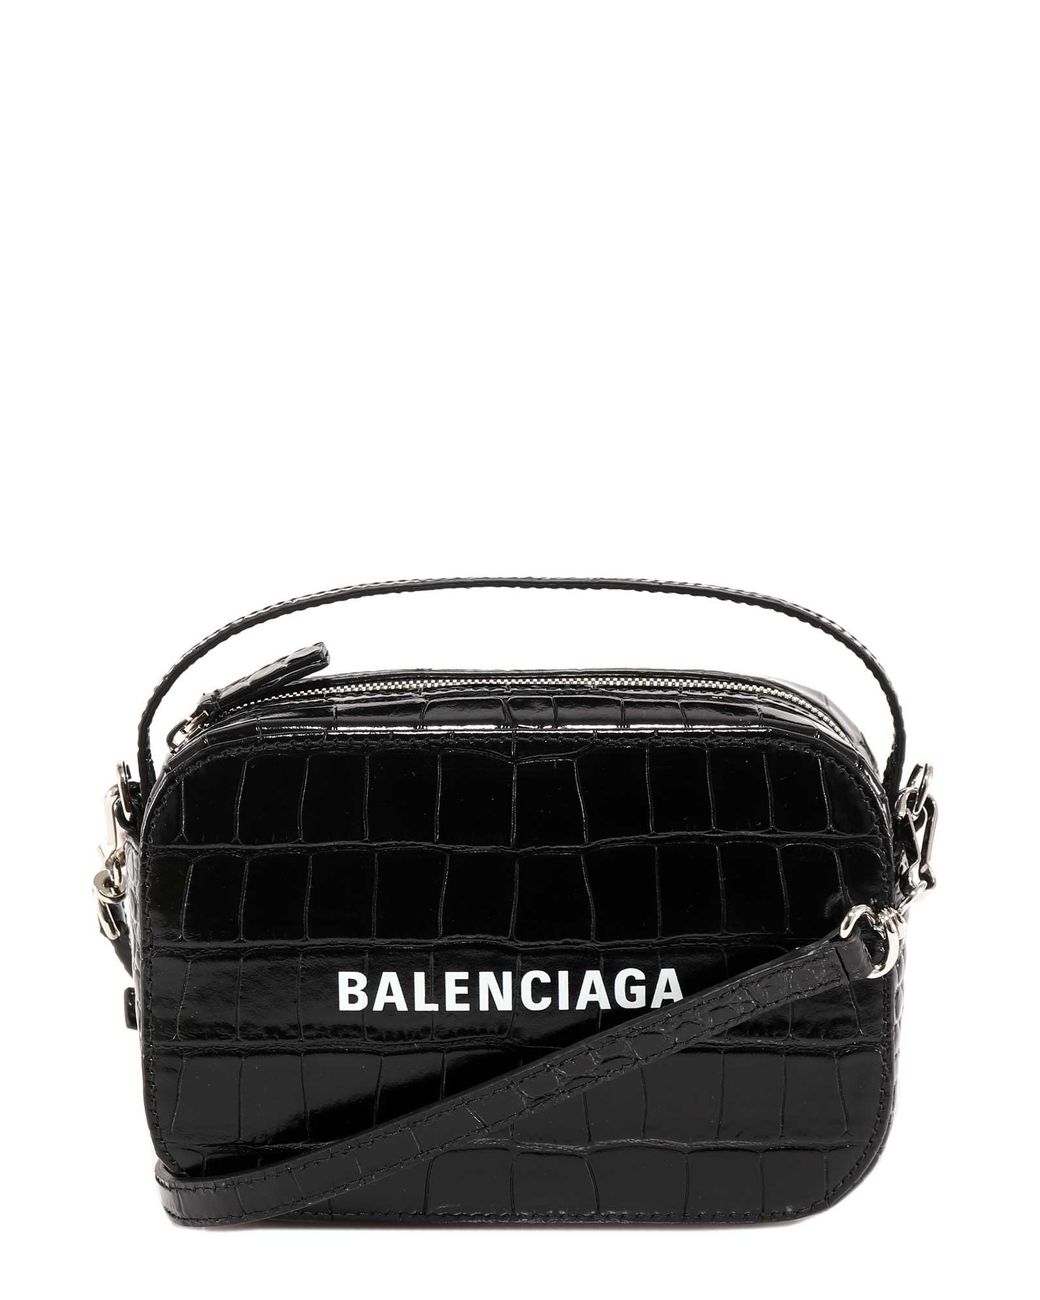 Balenciaga Leather Everyday Xs Embossed Camera Bag in Black - Lyst